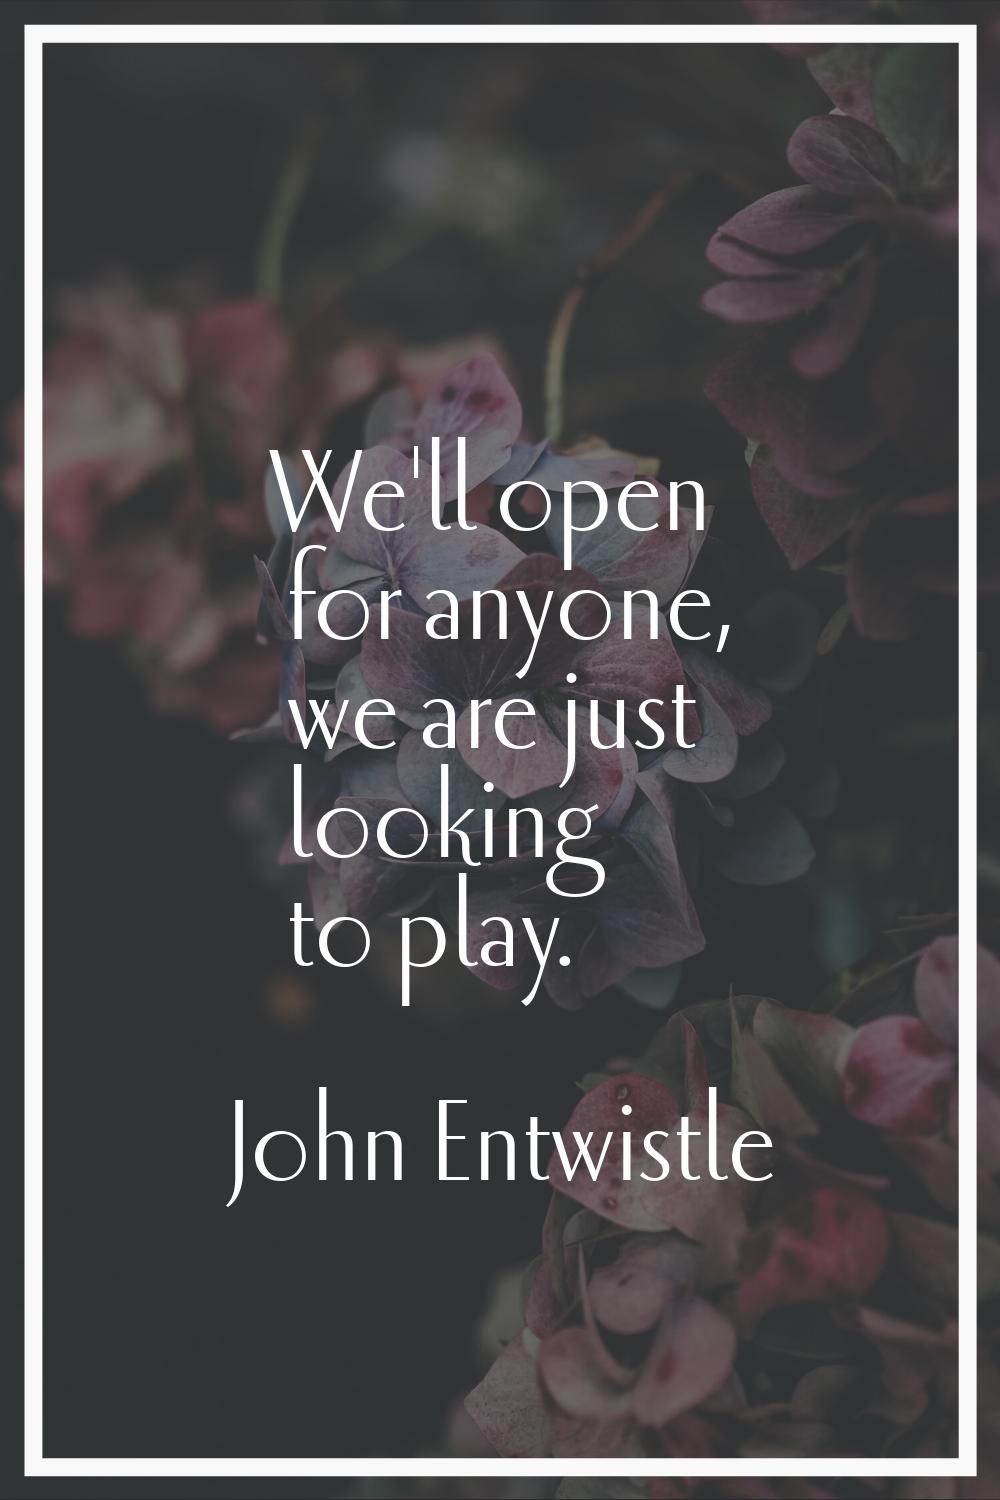 We'll open for anyone, we are just looking to play.